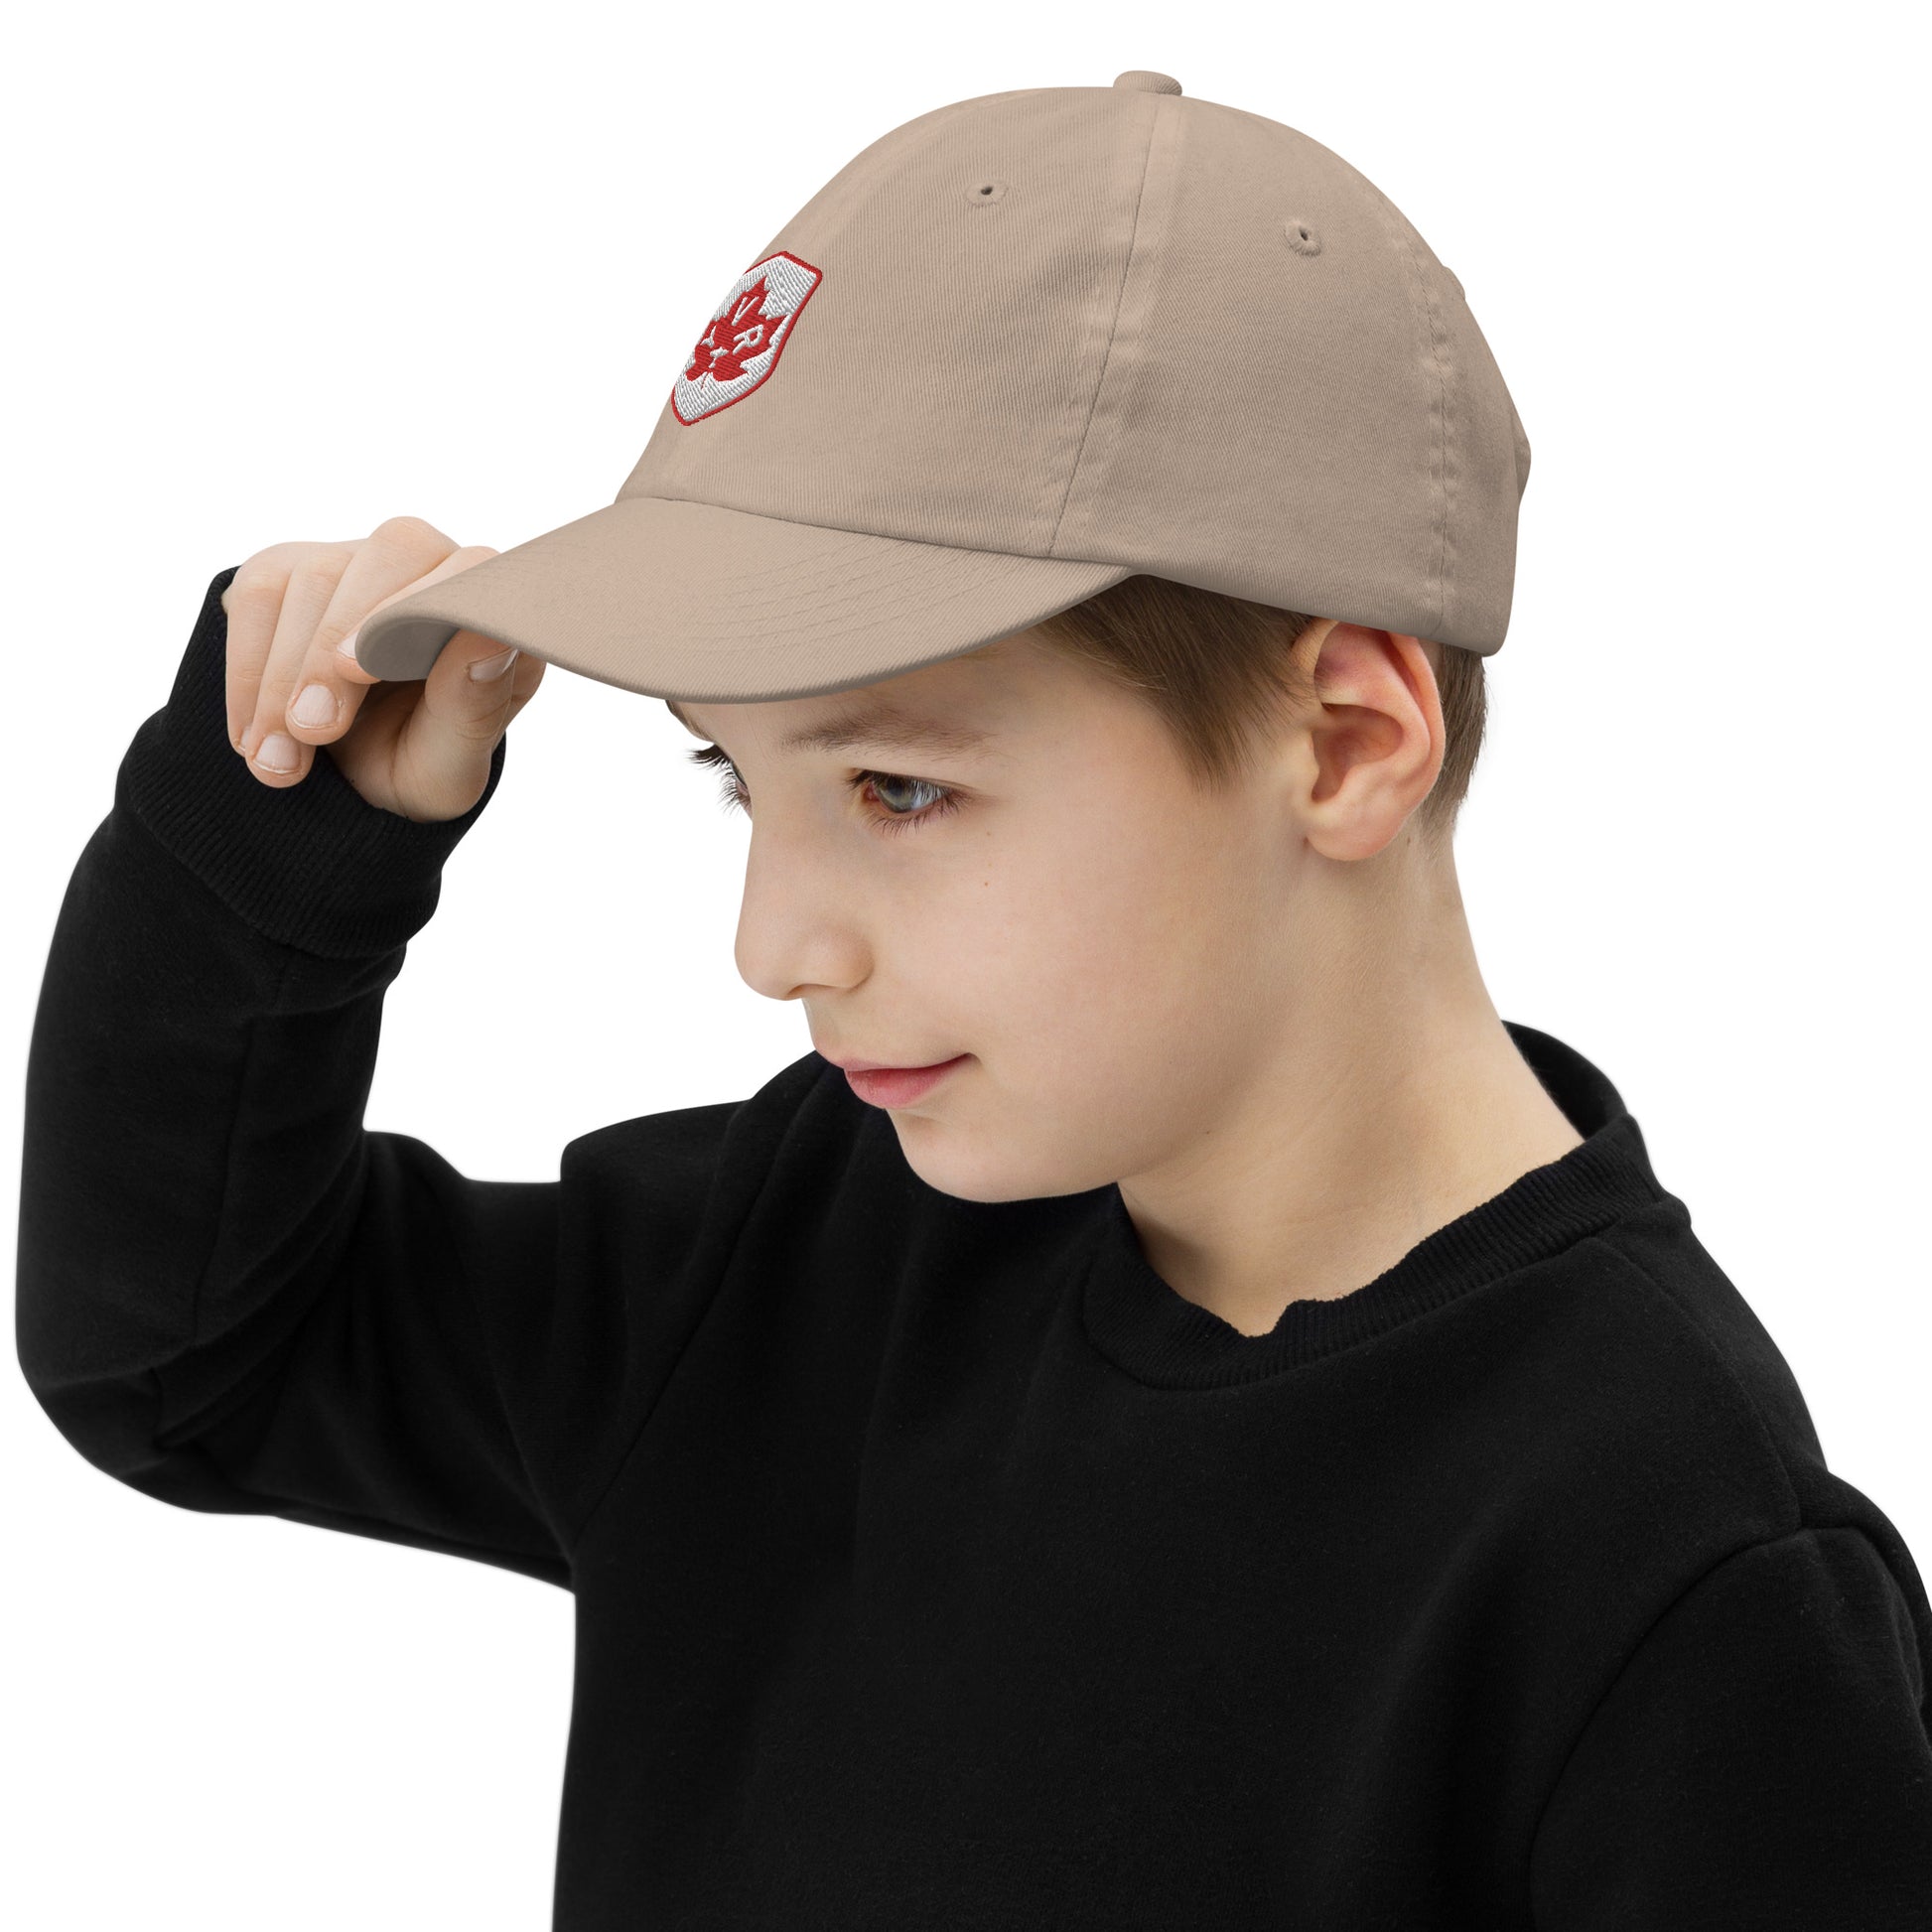 Maple Leaf Kid's Cap - Red/White • YVR Vancouver • YHM Designs - Image 10